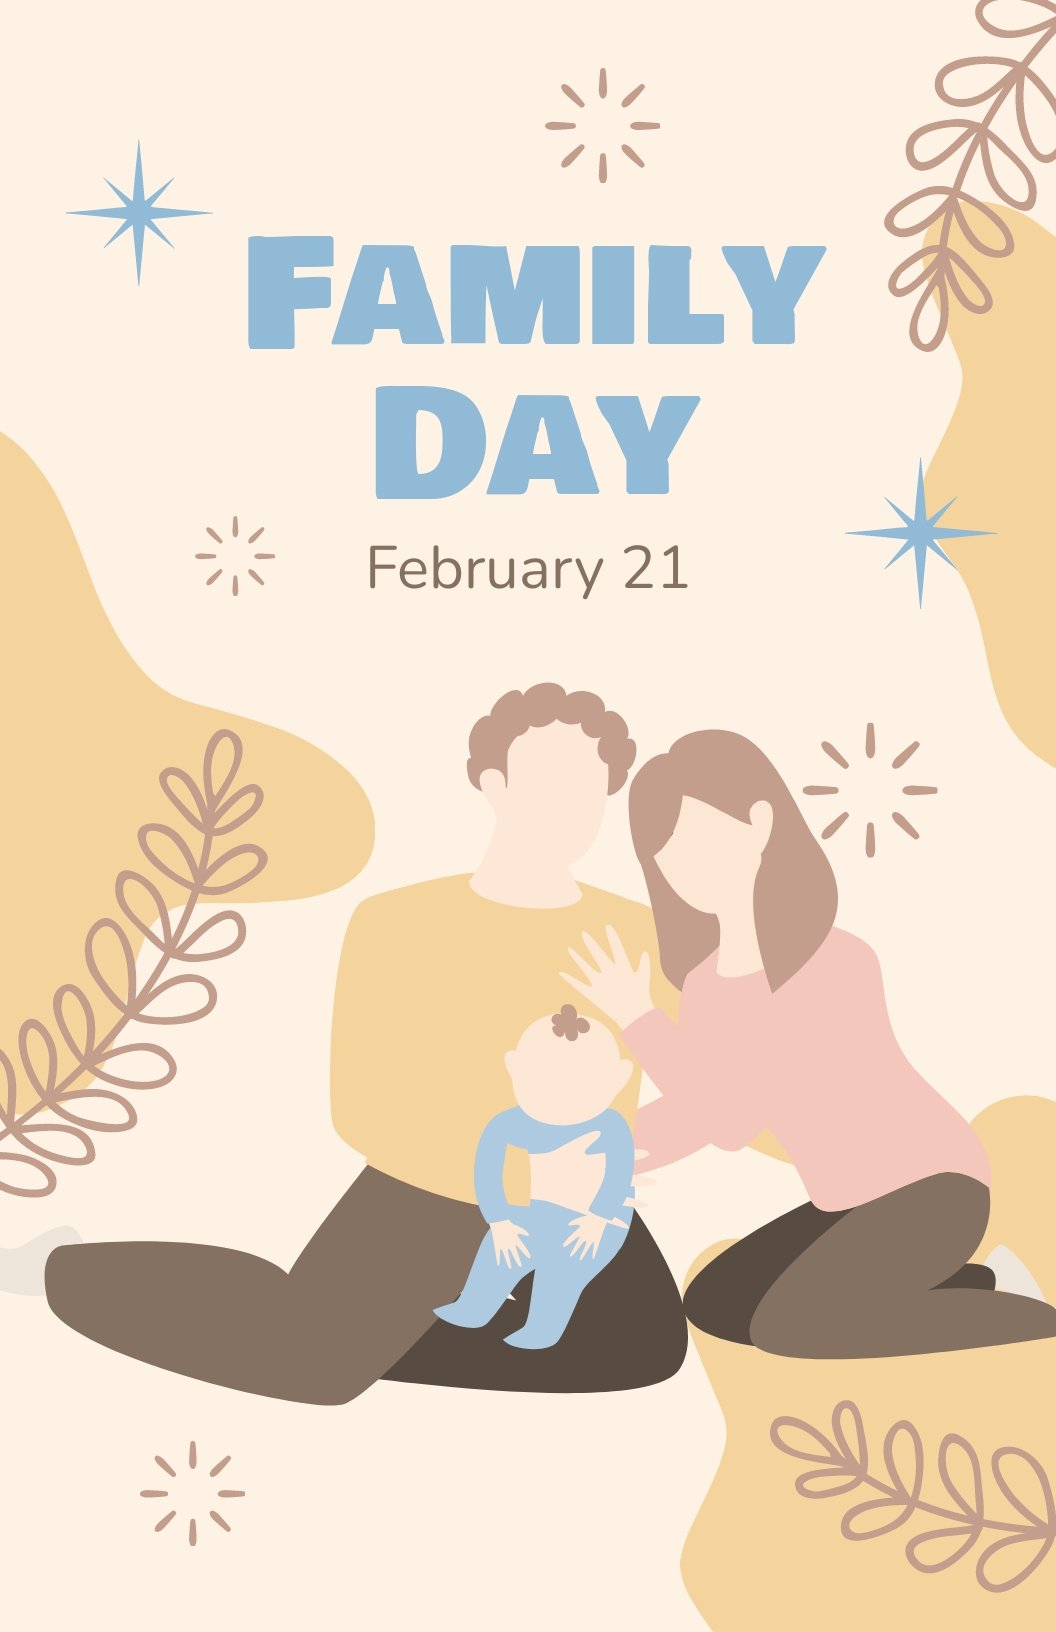 Family Day Templates - Images, Background, Free, Download | Template.net